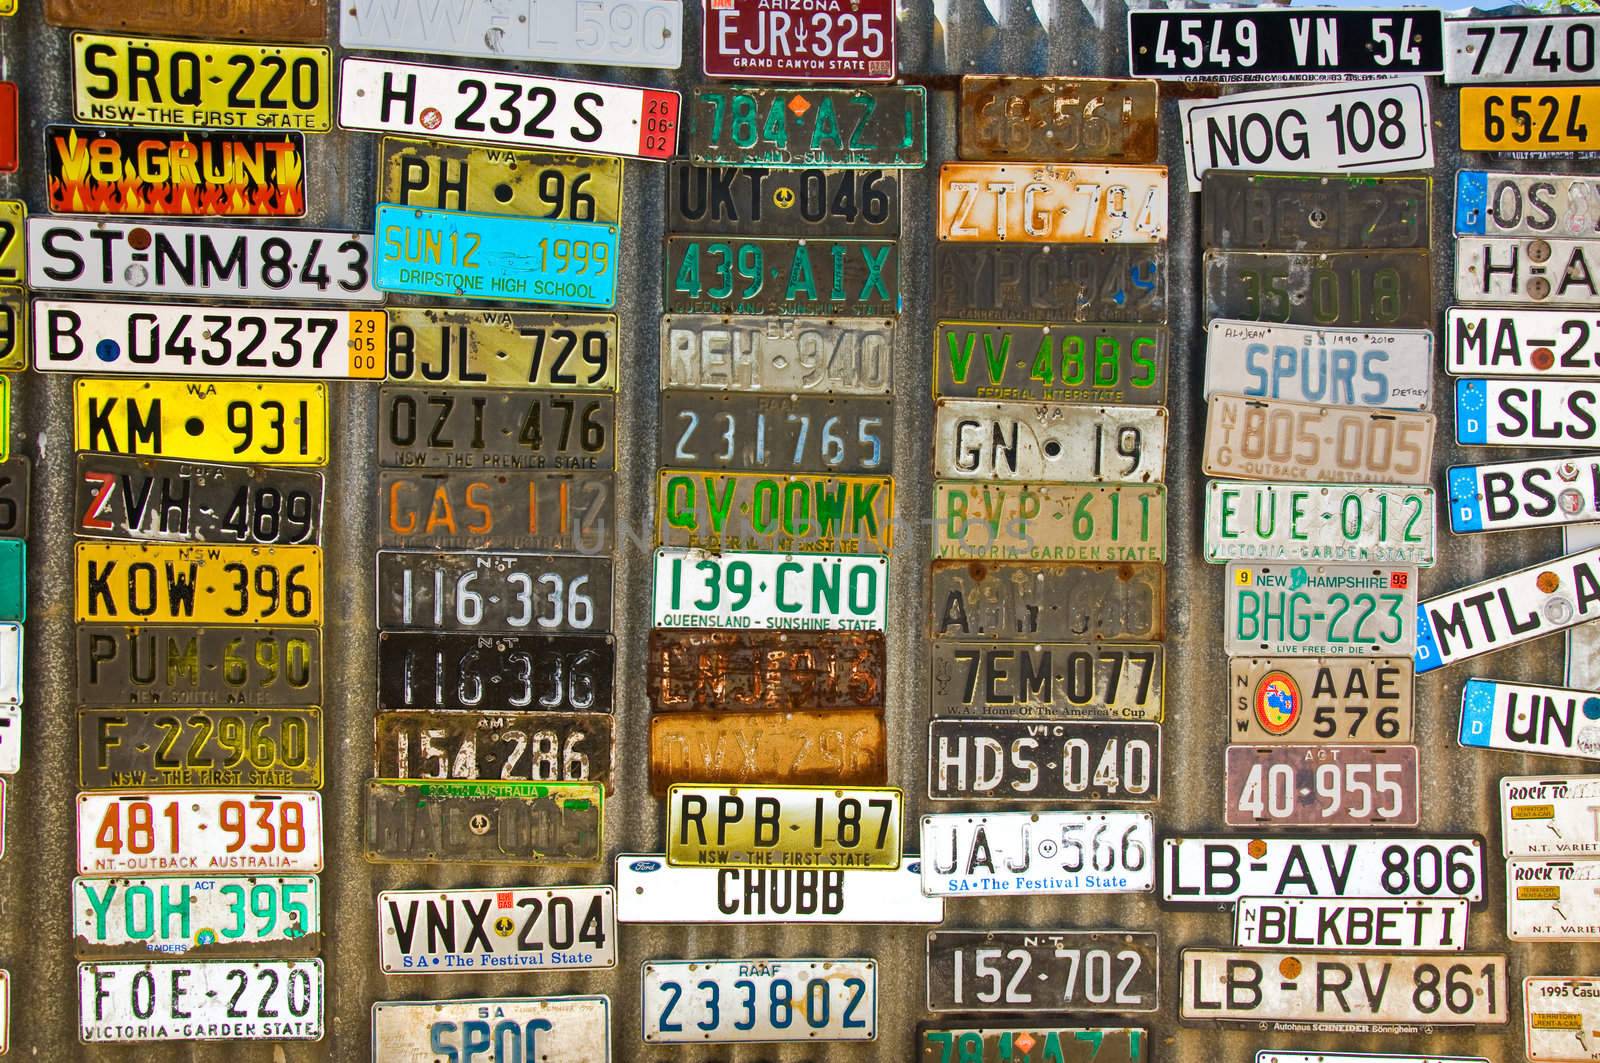 Car plates in a smal bar in the australian outback